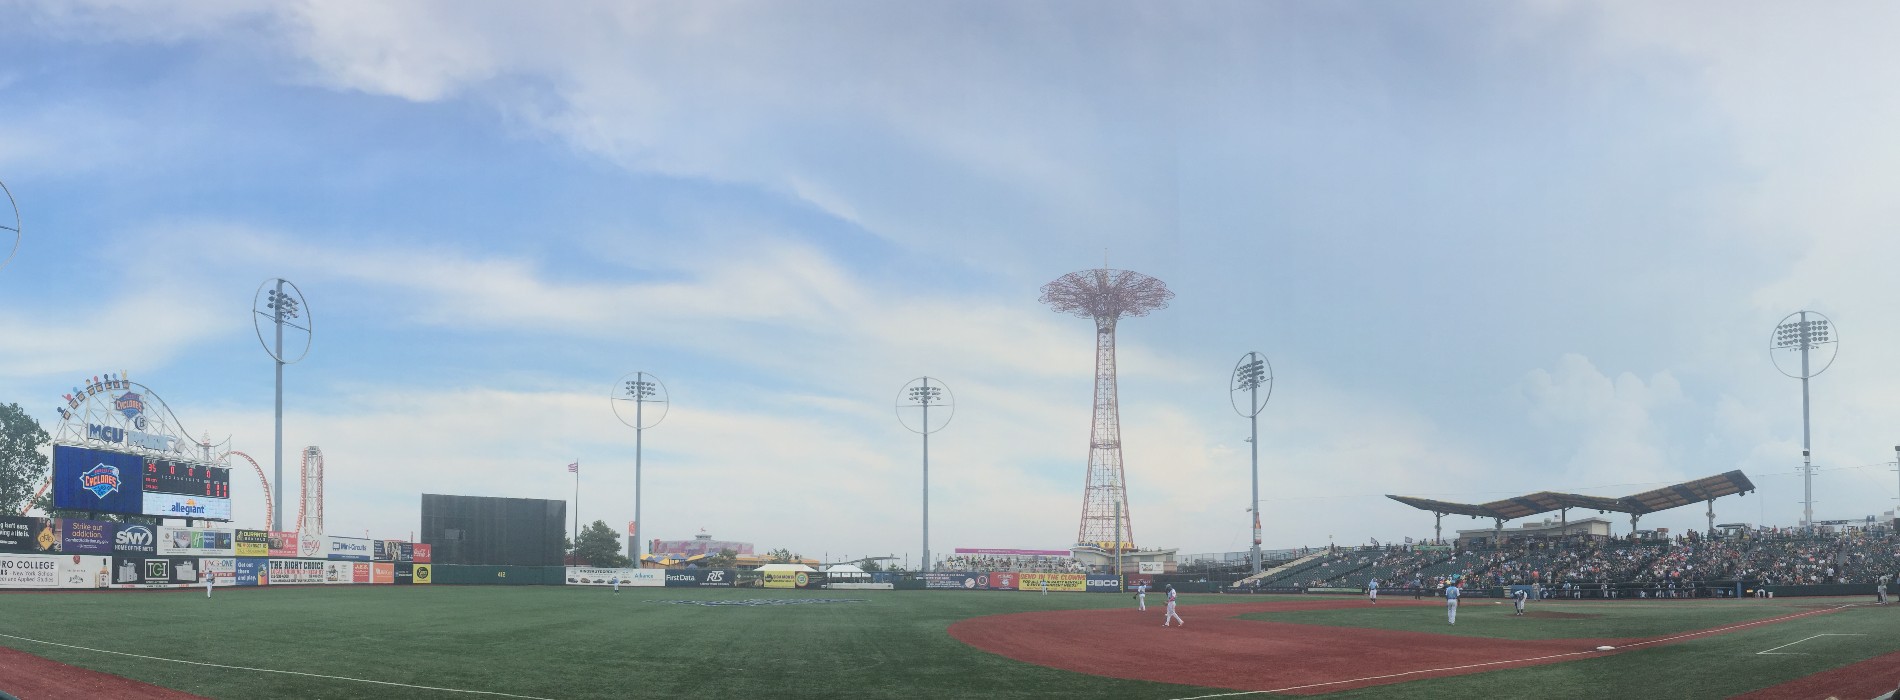 A panoramic view of the Coney Island ballpark under a blue sky, with the Parachute Jump's red tower at the center, beyond right field